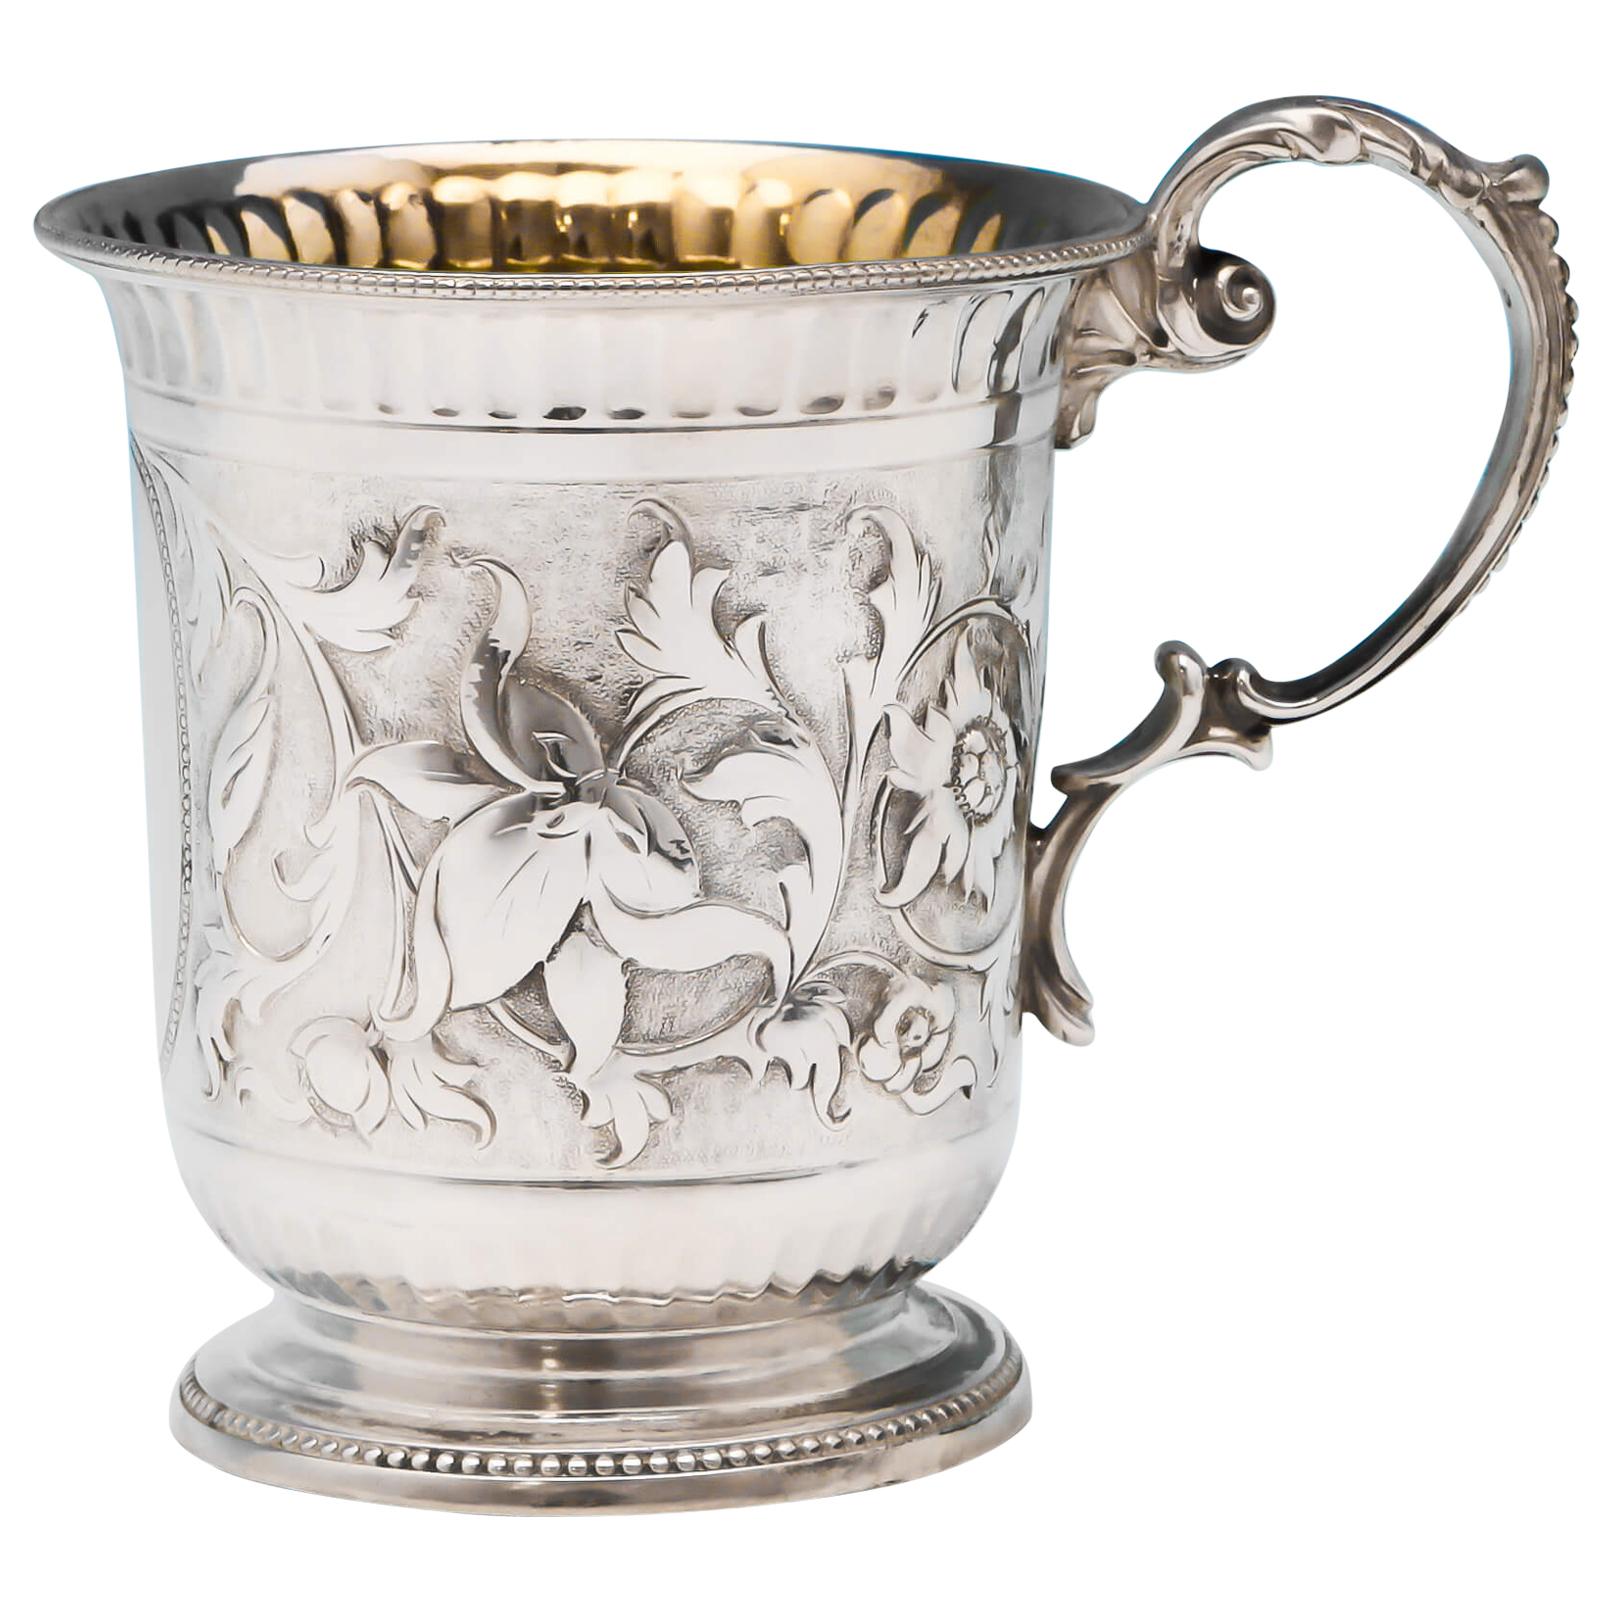 Victorian Chased Sterling Silver Christening Mug from 1867